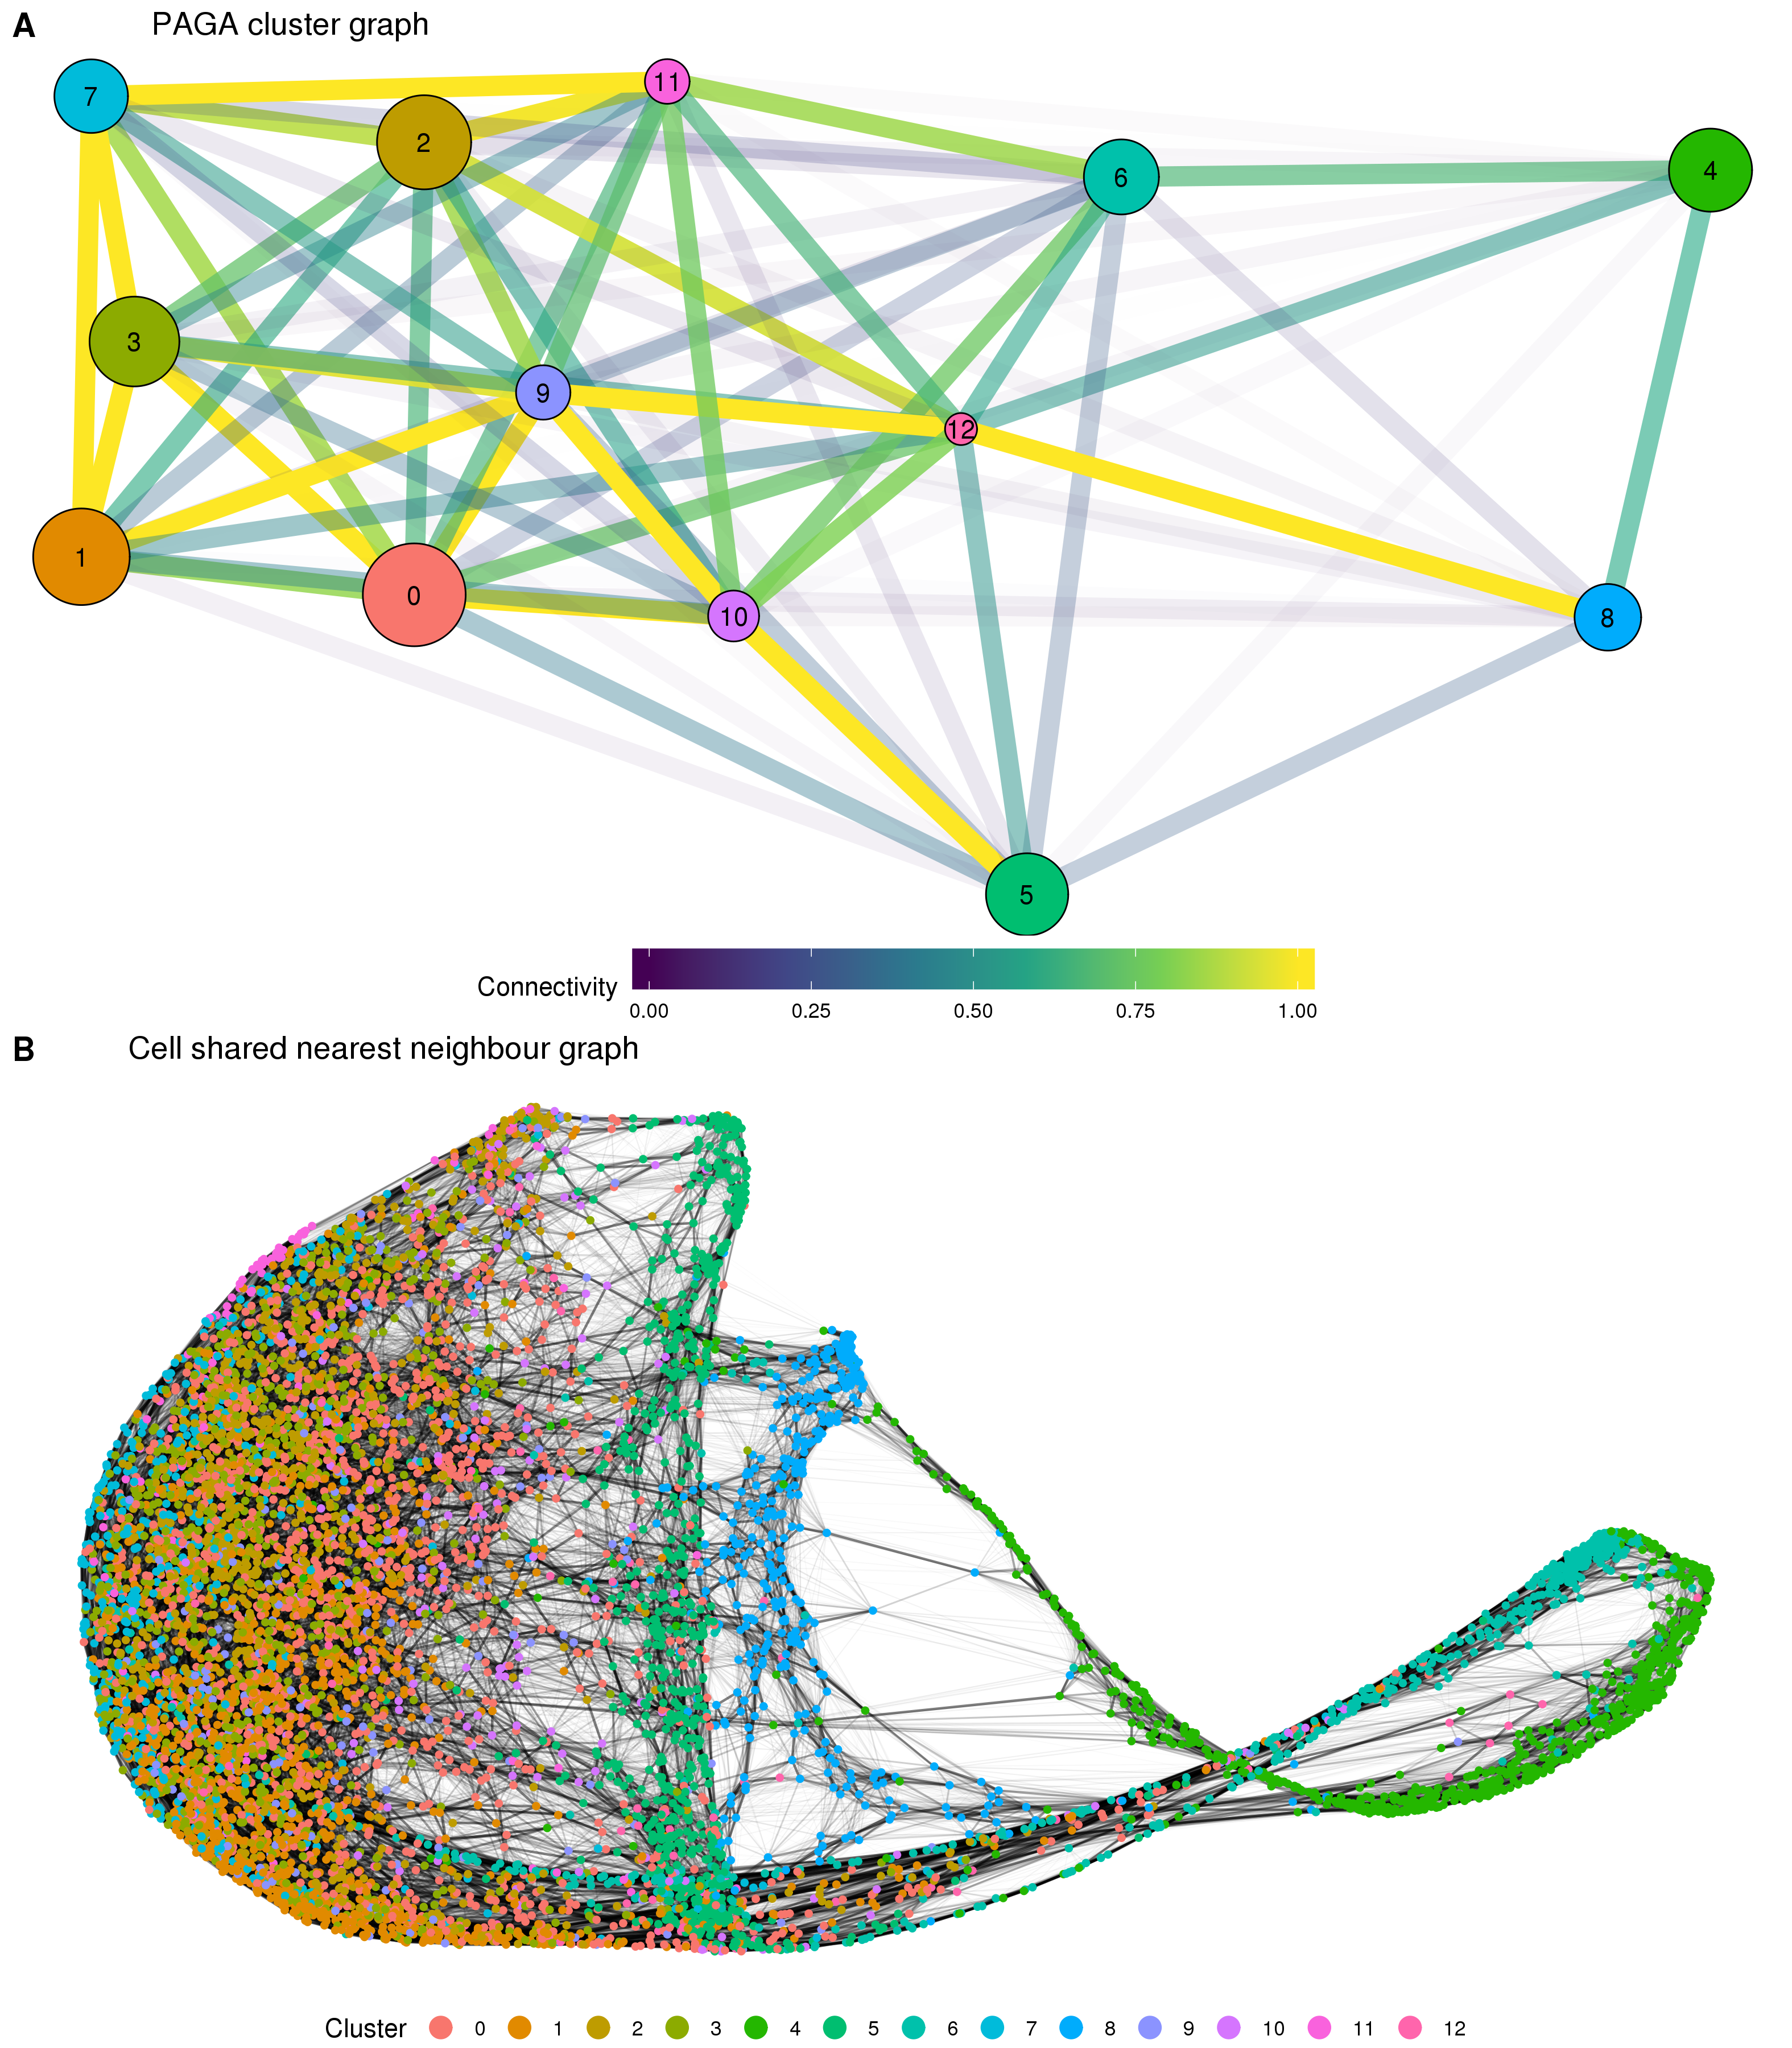 Results of partition-based graph abstraction (PAGA). (A) The cluster connectivity graph produced by PAGA. Each node represents a cluster and edges show the connectivity between clusters. The size of nodes indicates the number of cells in each cluster and the edge colour and transparency show the connectivity from low (blue) to high (yellow). (B). The underlying cell shared nearest neighbour graph. Nodes are cells coloured by cluster and edge weight indicates connectivity.